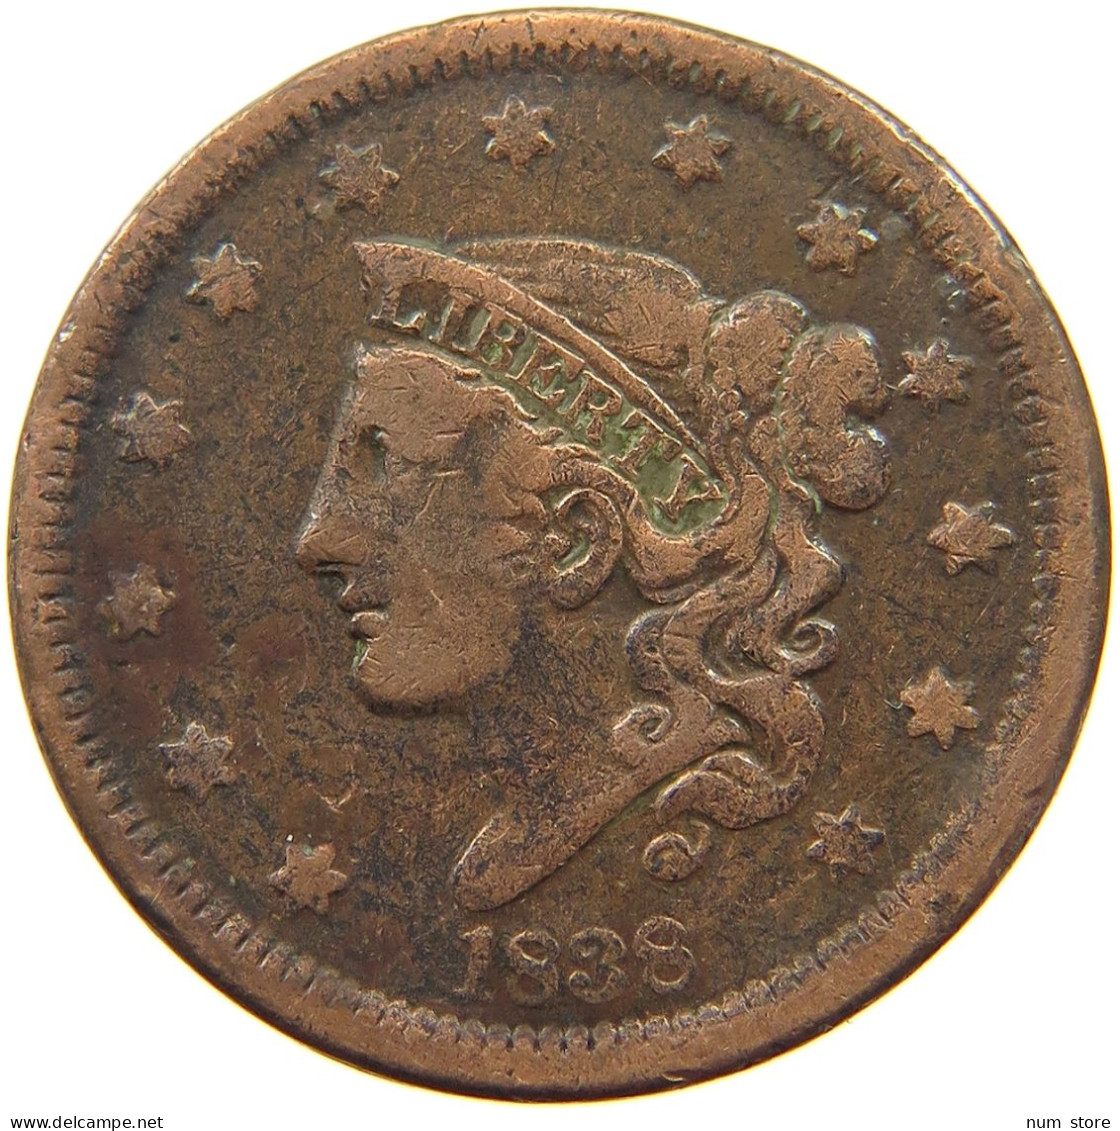 UNITED STATES OF AMERICA LARGE CENT 1838 CORONET HEAD #t122 0583 - 1816-1839: Coronet Head (Tête Couronnée)